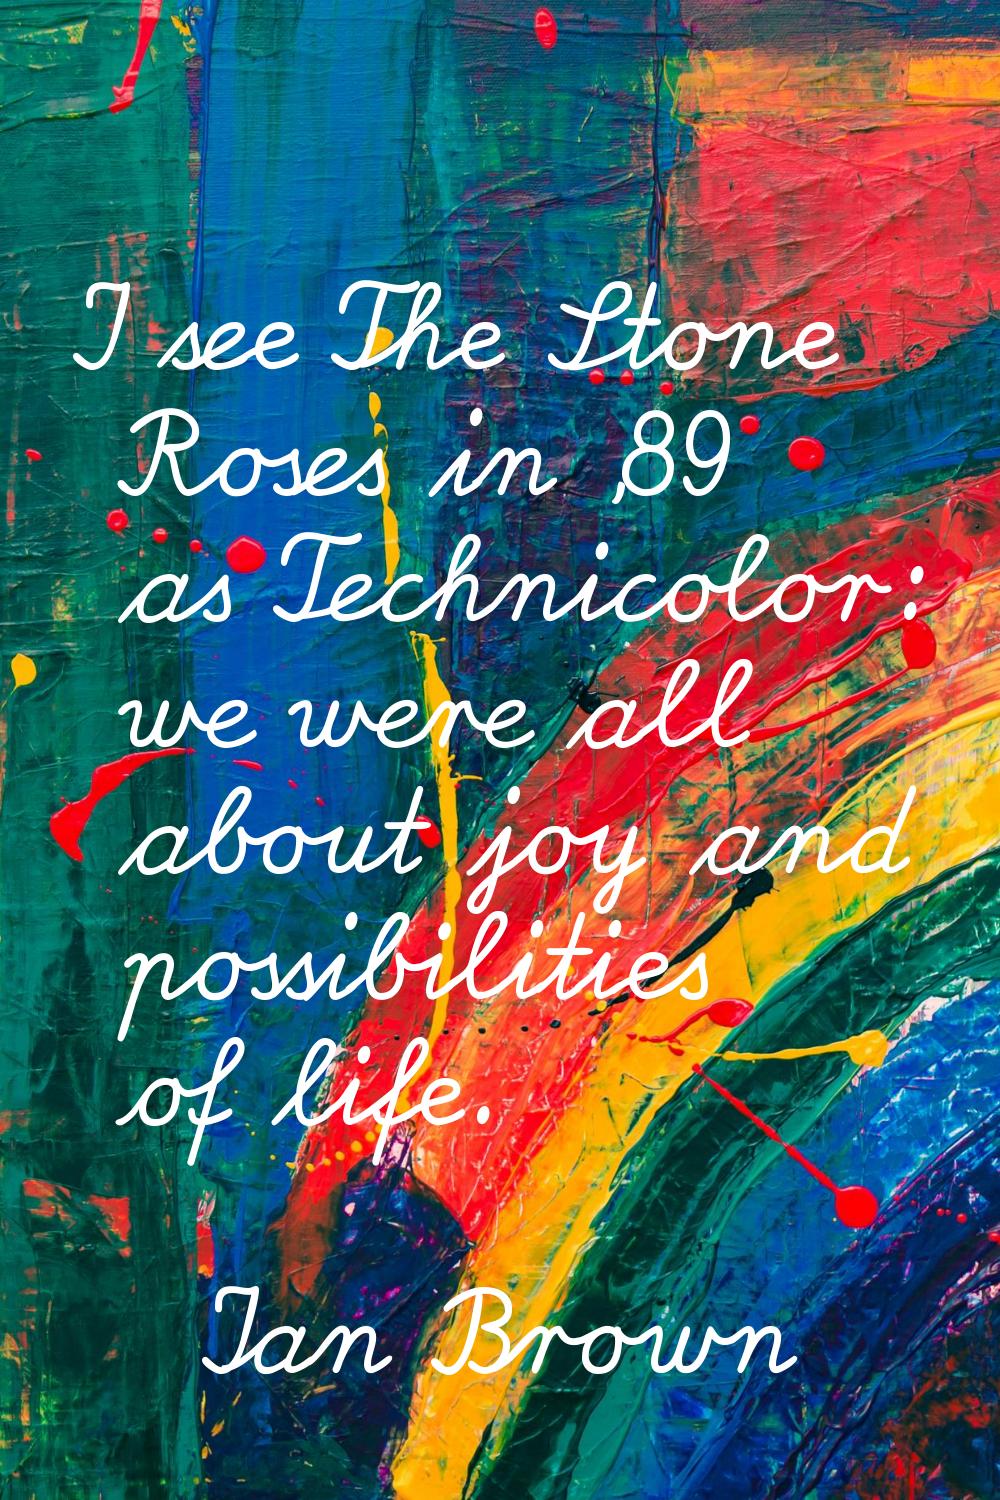 I see The Stone Roses in '89 as Technicolor: we were all about joy and possibilities of life.